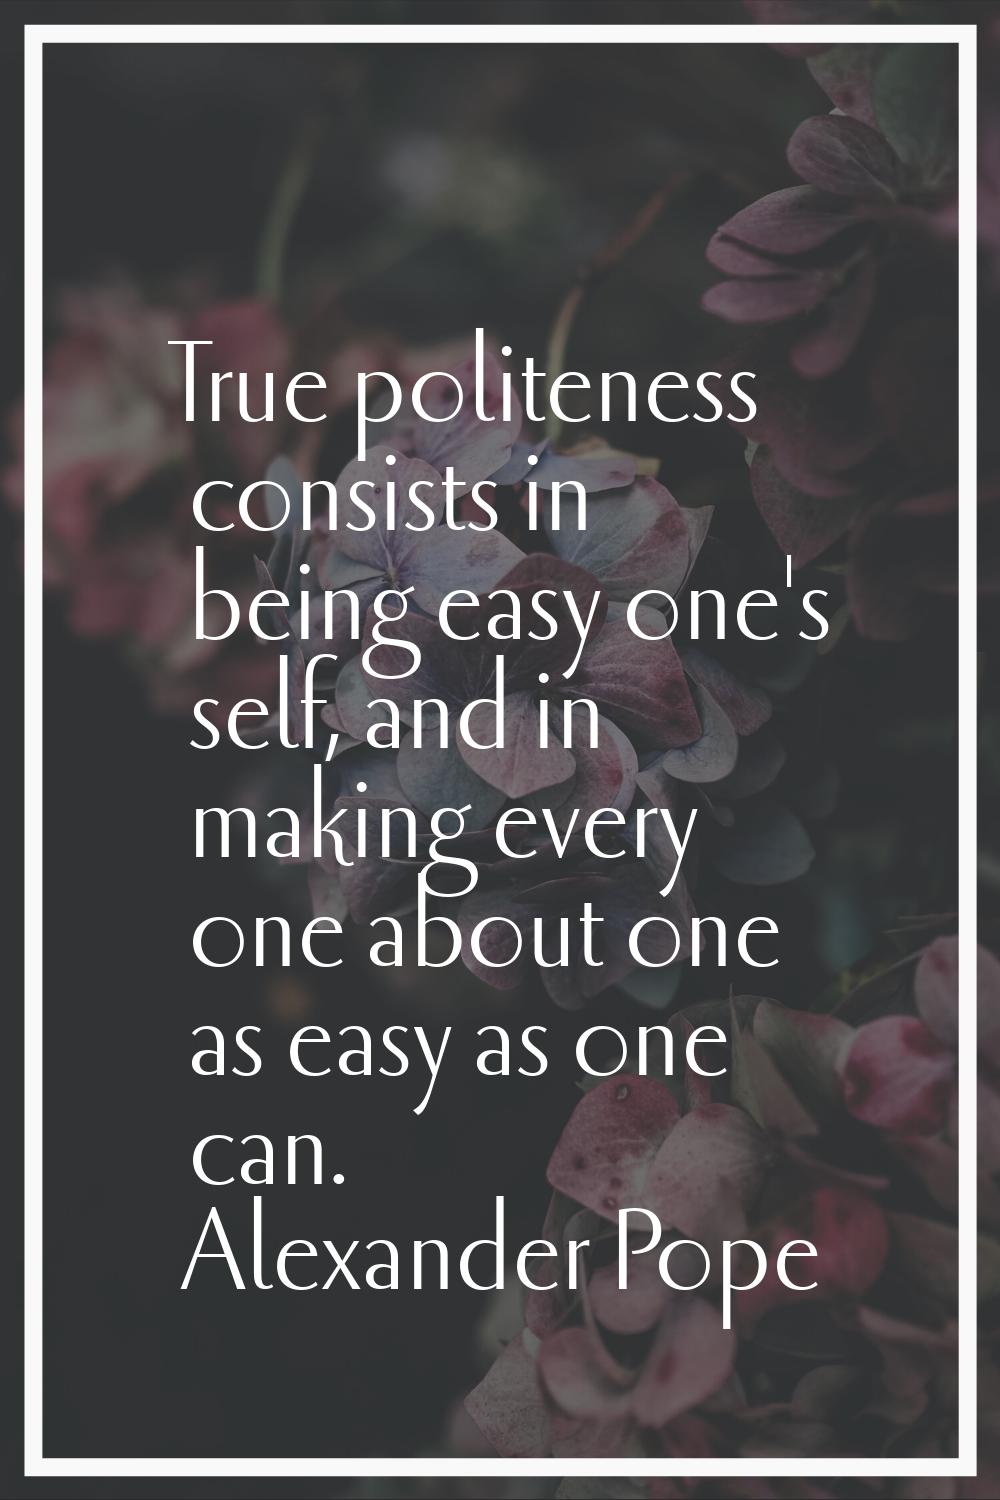 True politeness consists in being easy one's self, and in making every one about one as easy as one